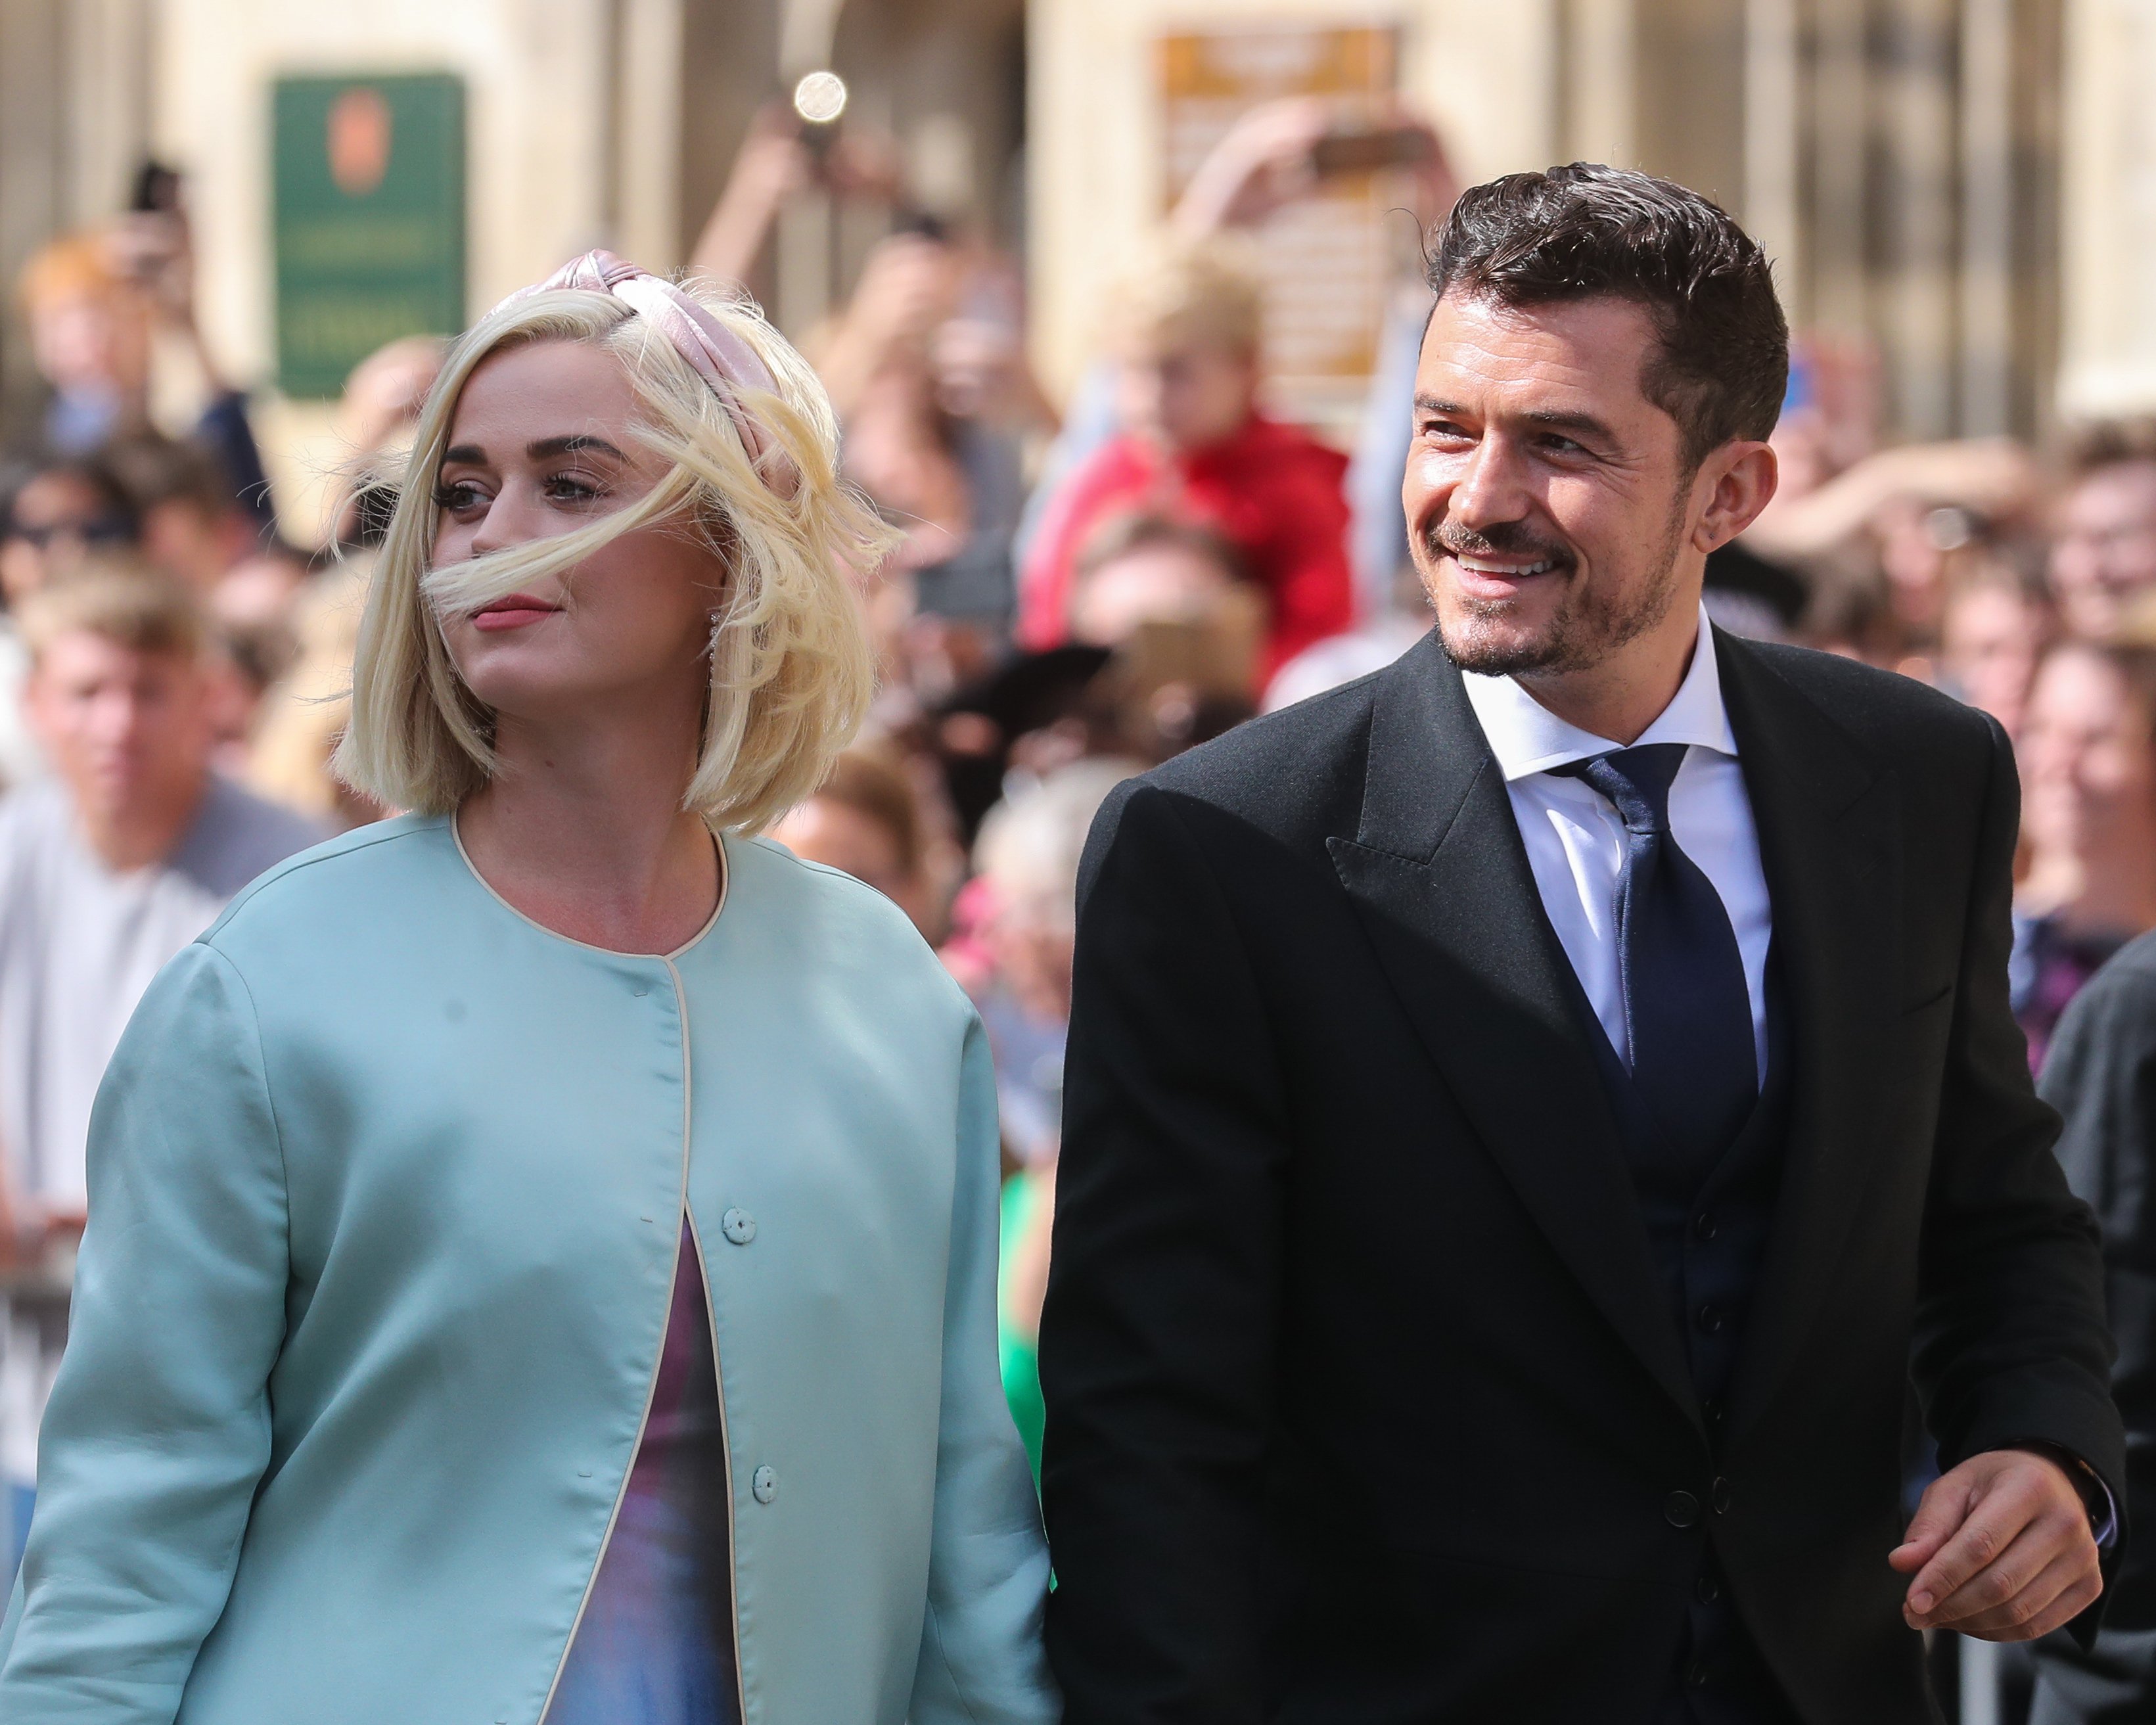  Katy Perry and Orlando Bloom attend Ellie Goulding and Caspar Jopling's wedding on August 31, 2019, in York, England. | Source: Getty Images.